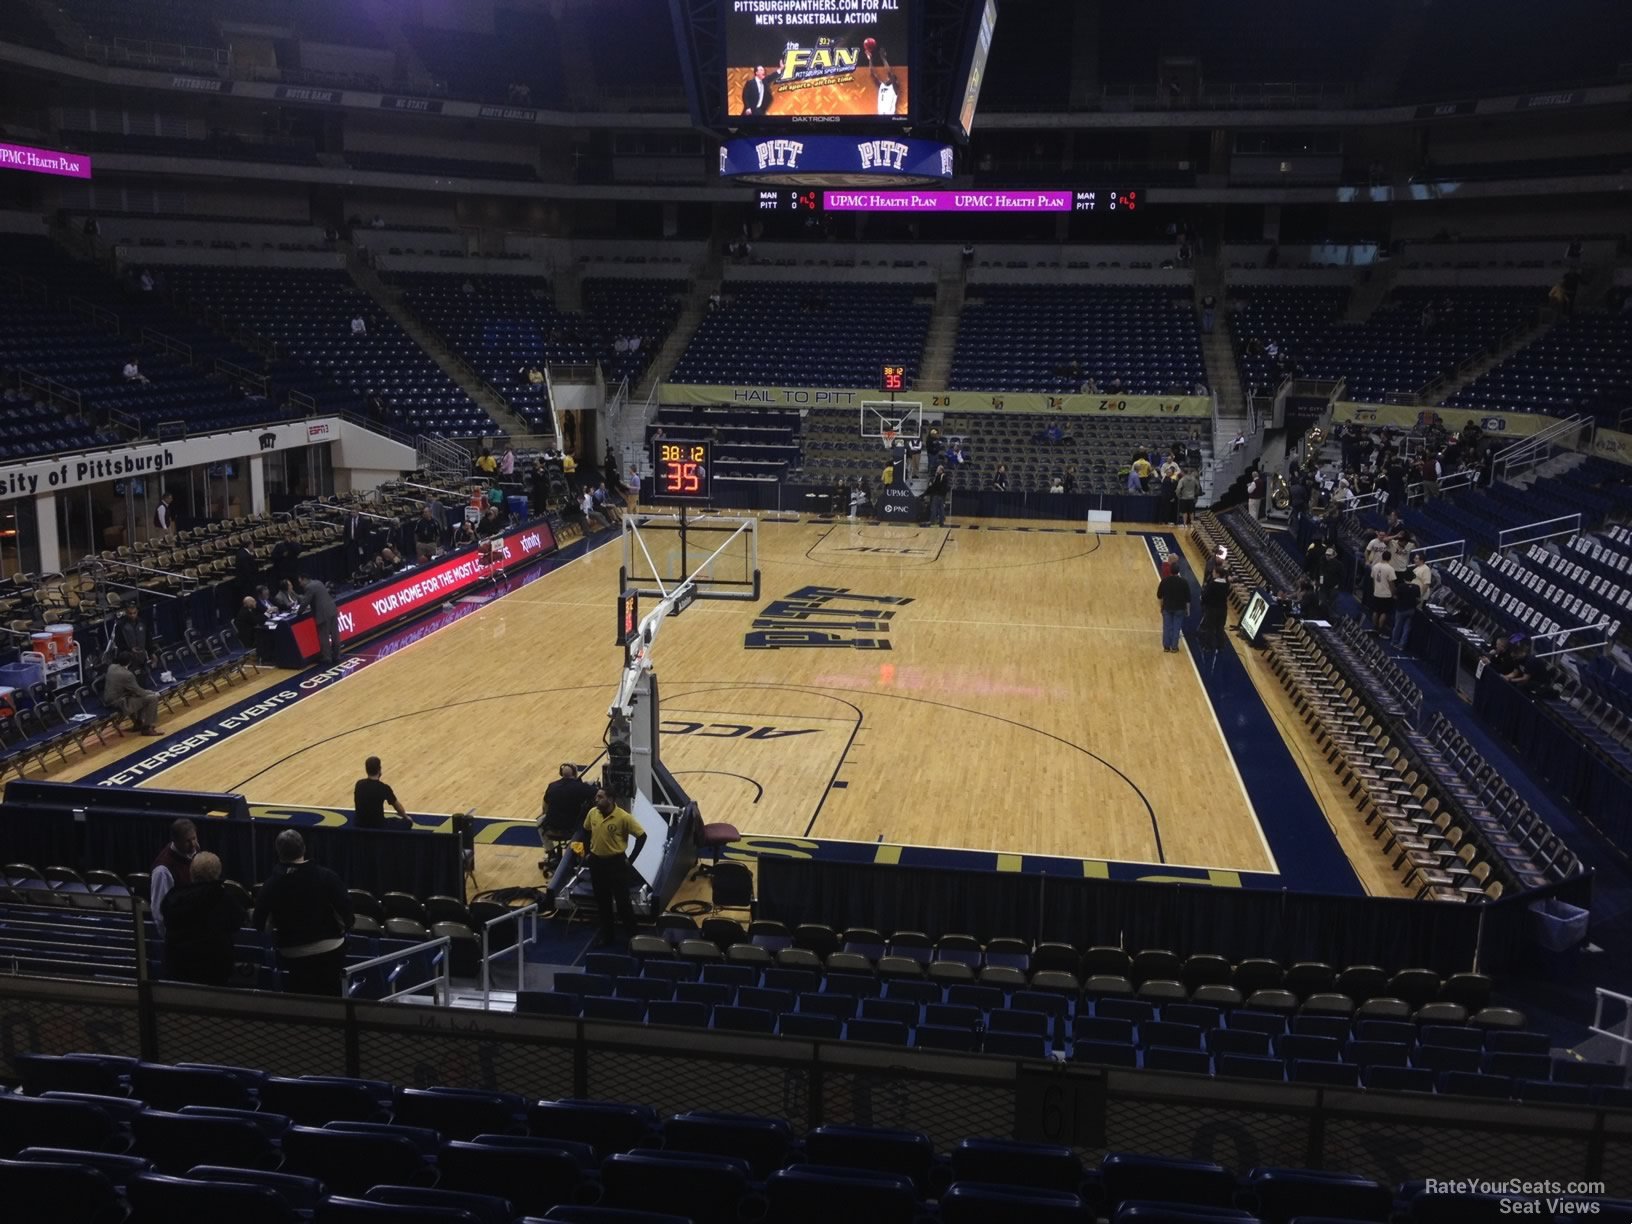 section 114, row n seat view  - petersen events center